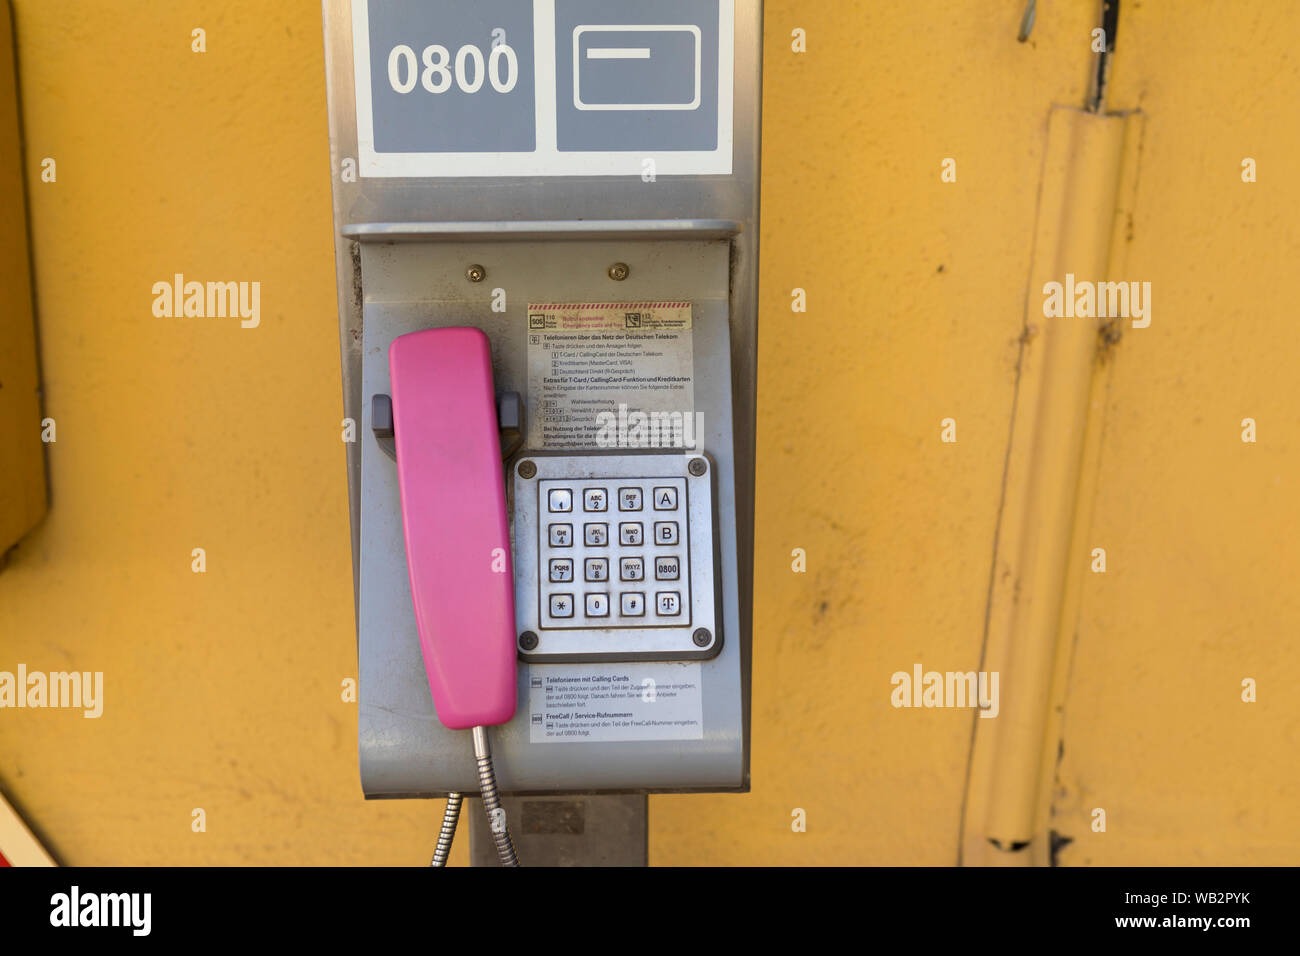 Old fashioned public telephone at the inner city post office, Nierstein Germany Stock Photo